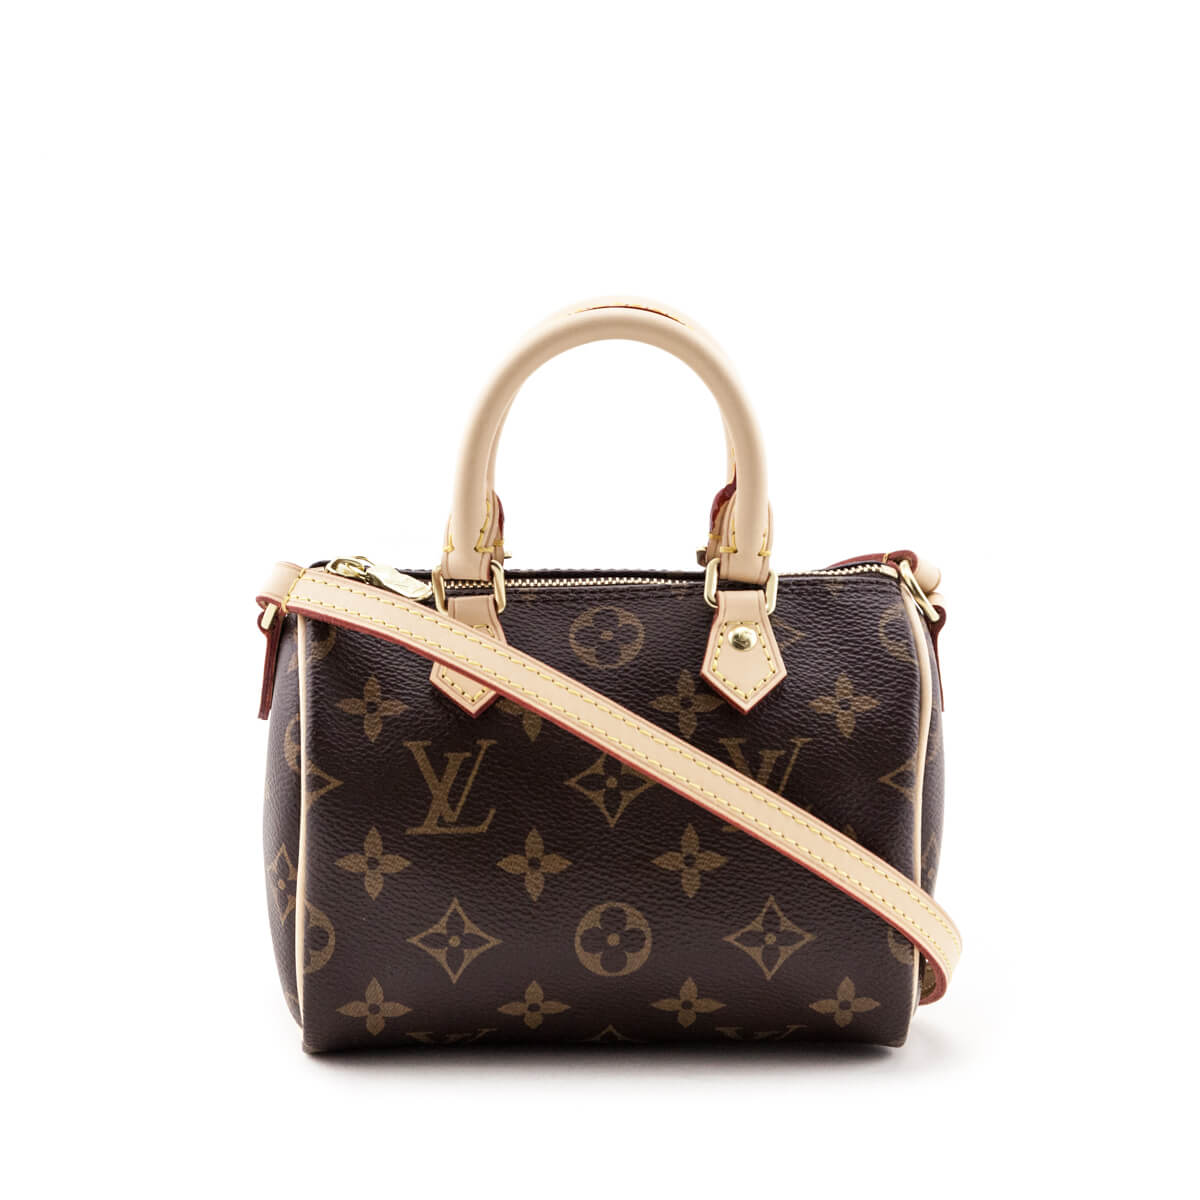 A much coveted Louis Vuitton collectors piece, this brand new Nano